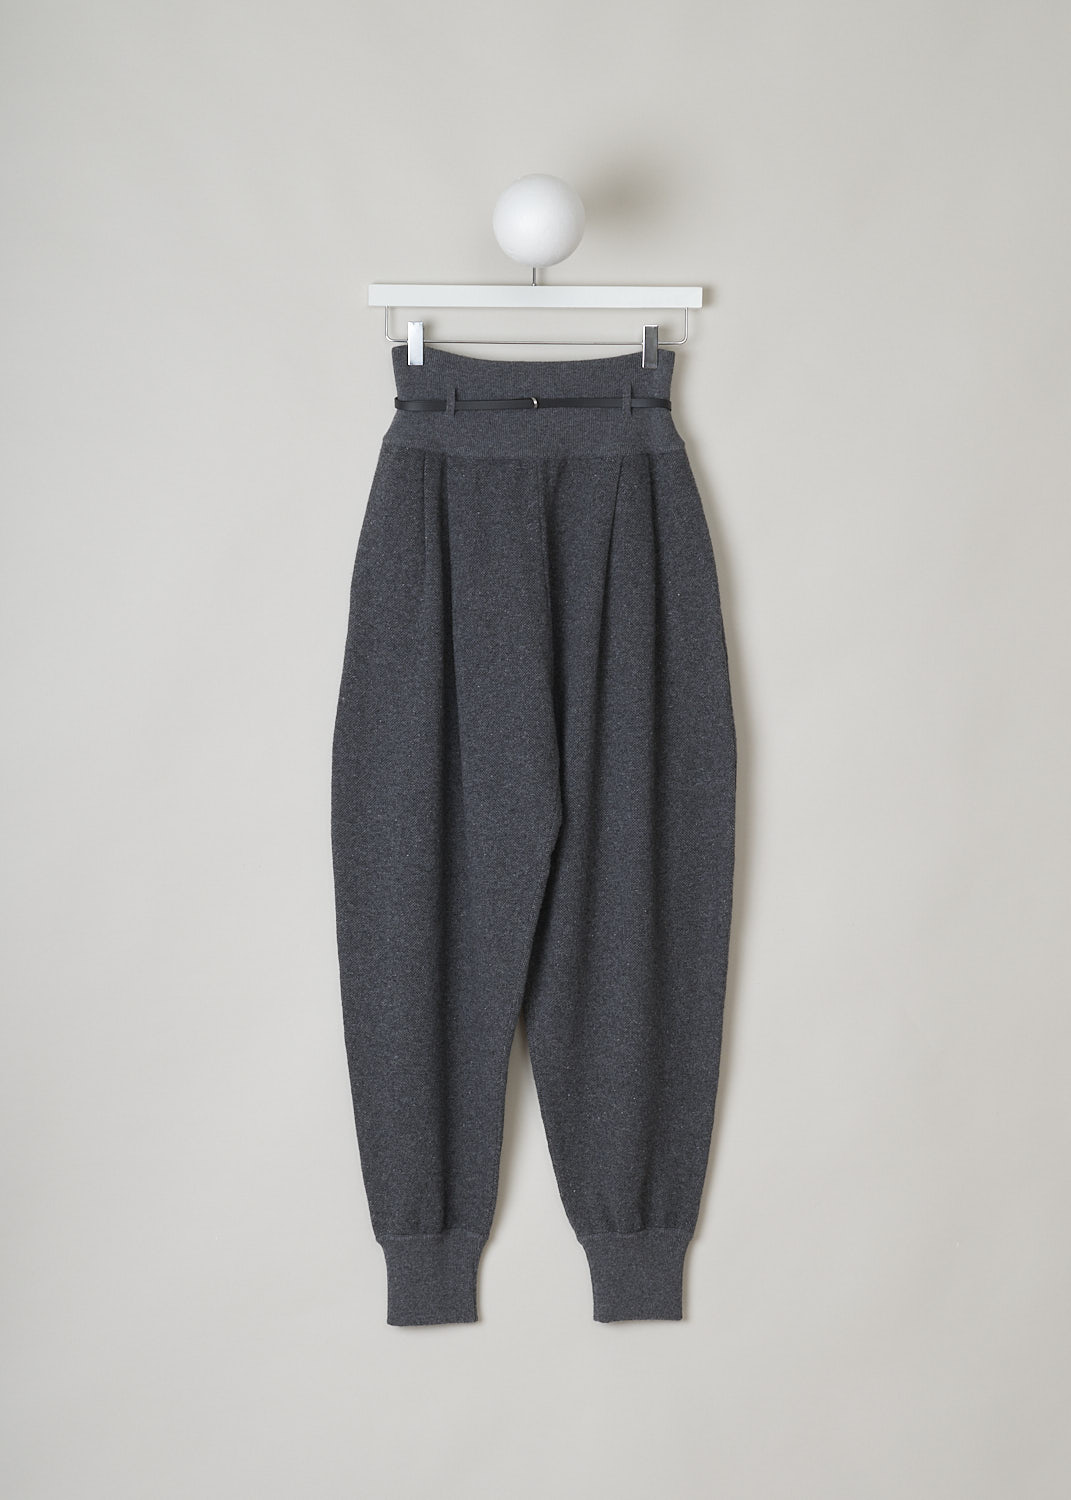 THE ROW, HEATHER GREY PANTS WITH LEATHER BELT, DADO_PANT_5765F377_GREY_MELANGE, Grey, Front, These heather grey cashmere-blend pants are high-waisted. The broad elasticated waistband has a ribbed finish. These pants come with a narrow leather belt with a silver-tone D-ring. The balloon pants legs have front pleats, concealed slanted pockets and elasticated ankle cuffs.
